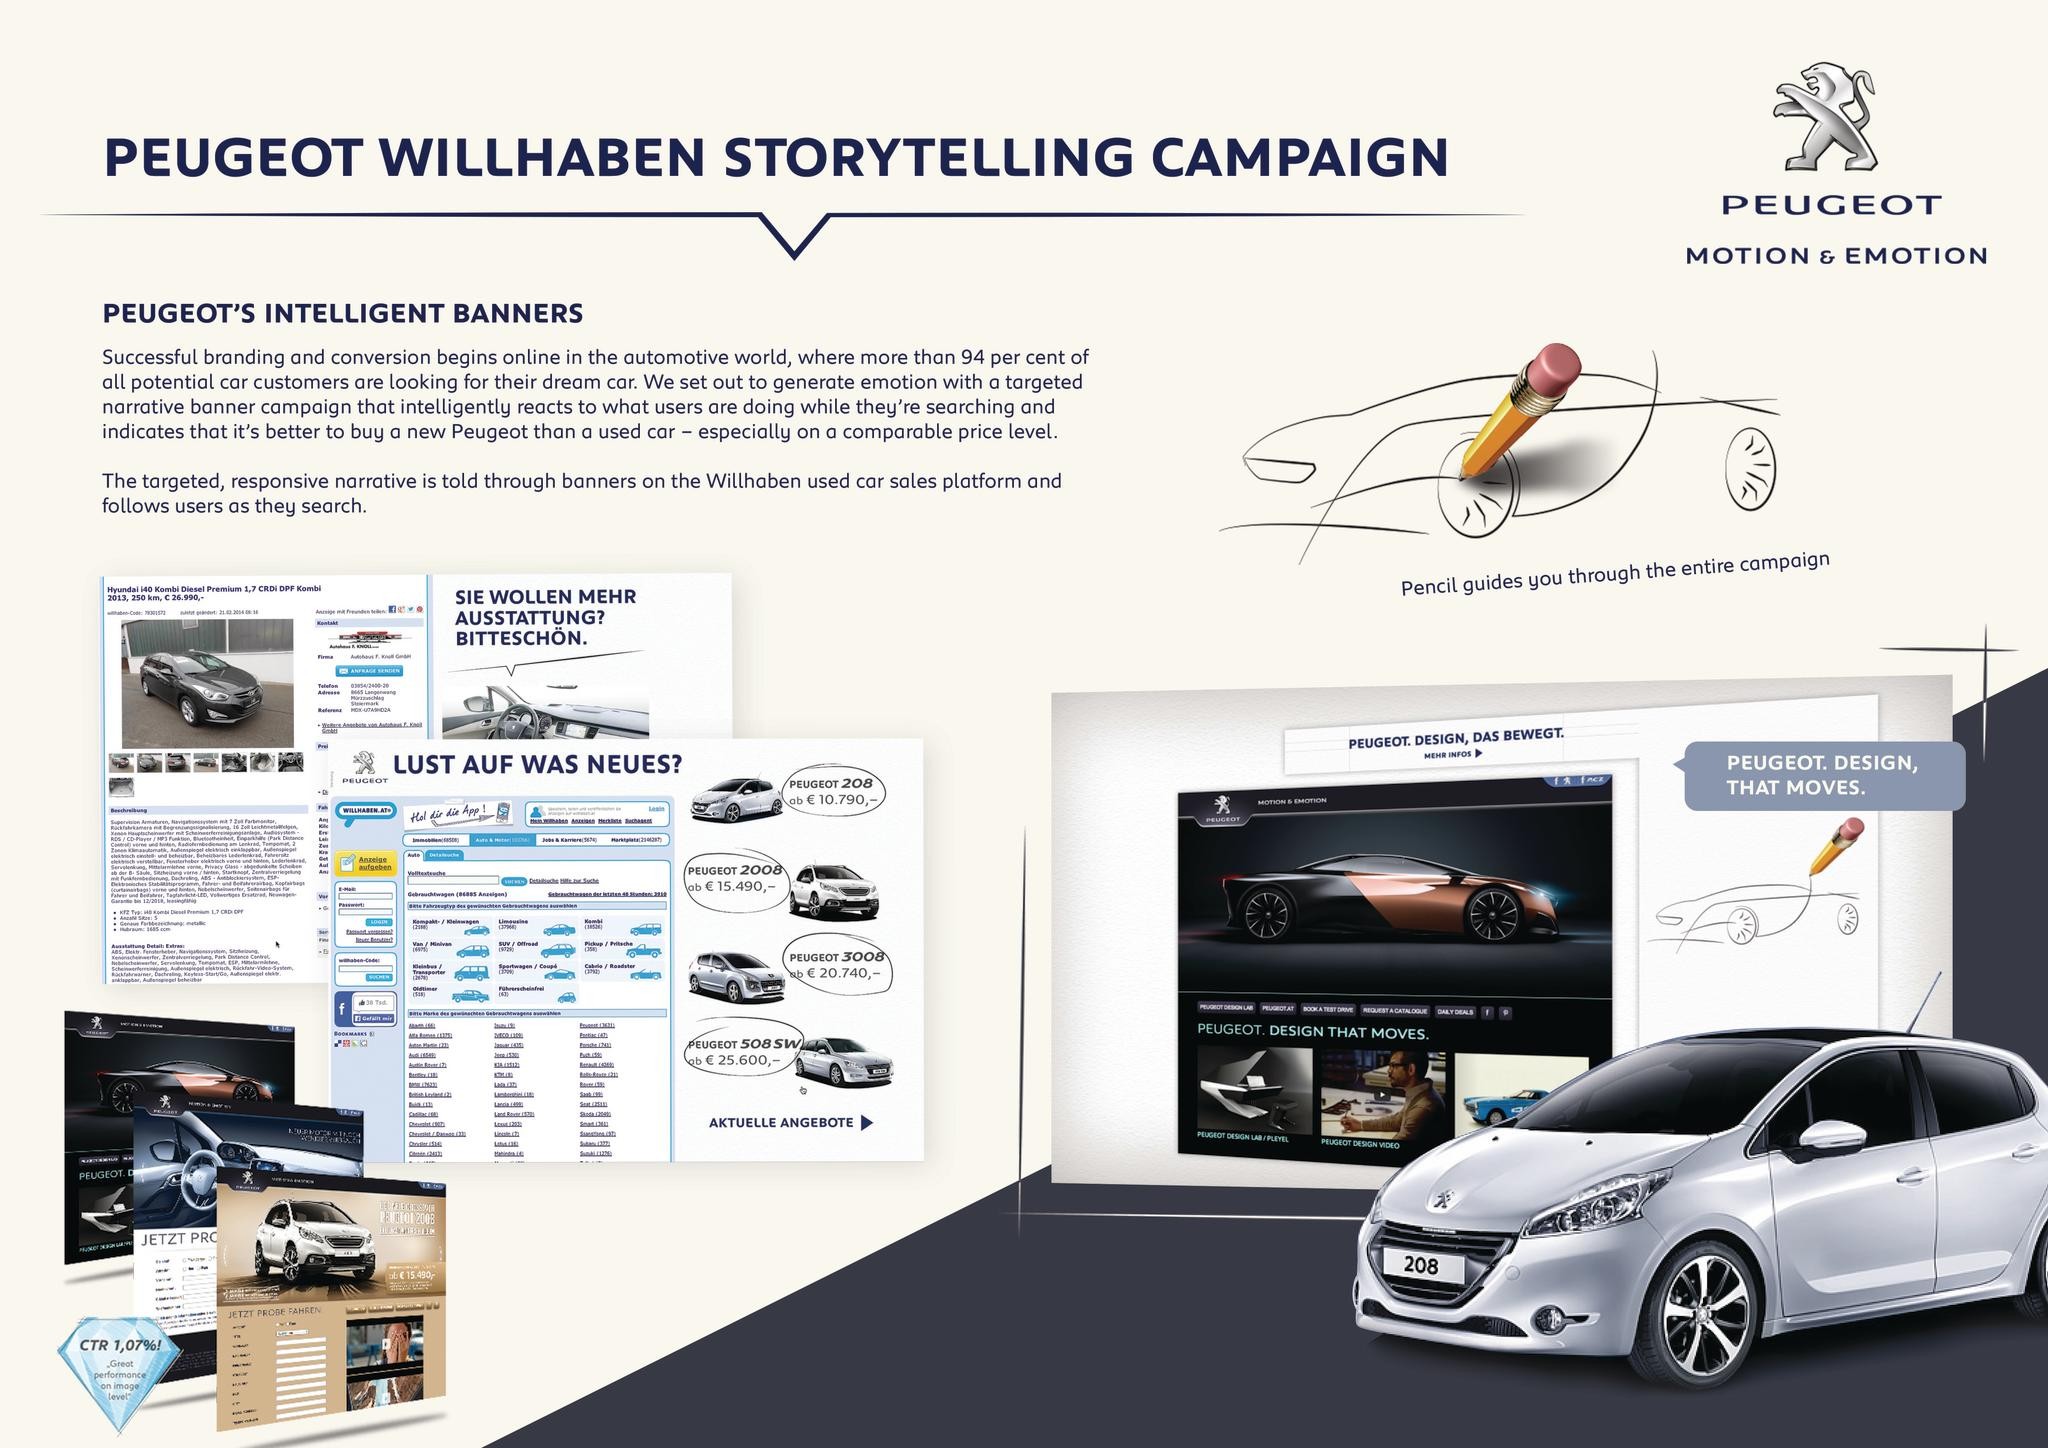 PEUGEOT WILLHABEN STORYTELLING CAMPAIGN